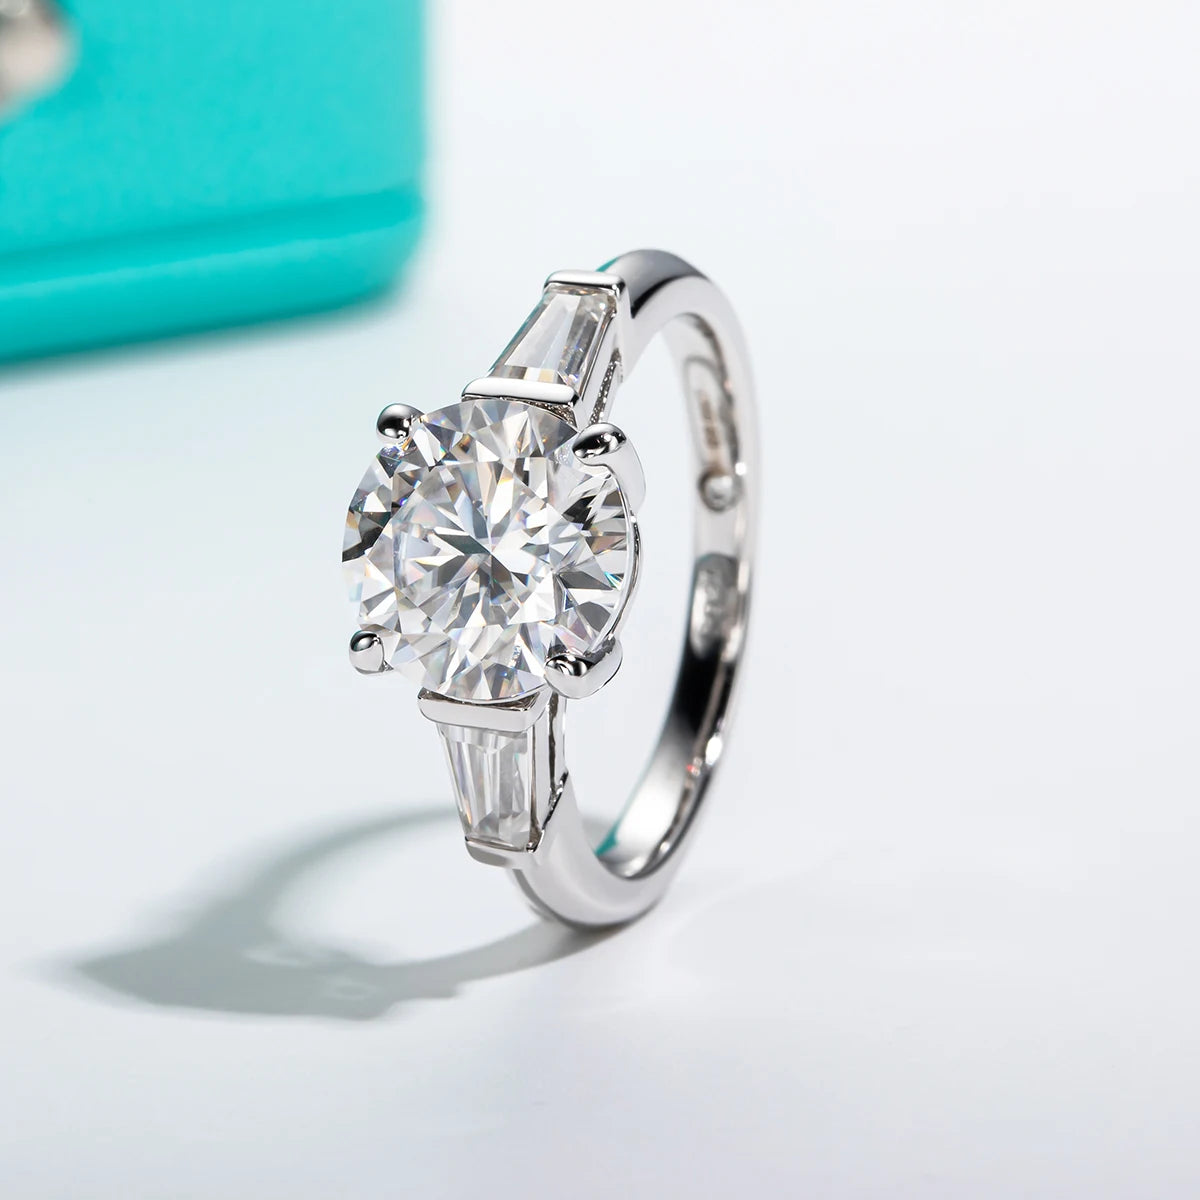 Moissanite engagement wedding ring: Chic, Affordable Wedding Choices